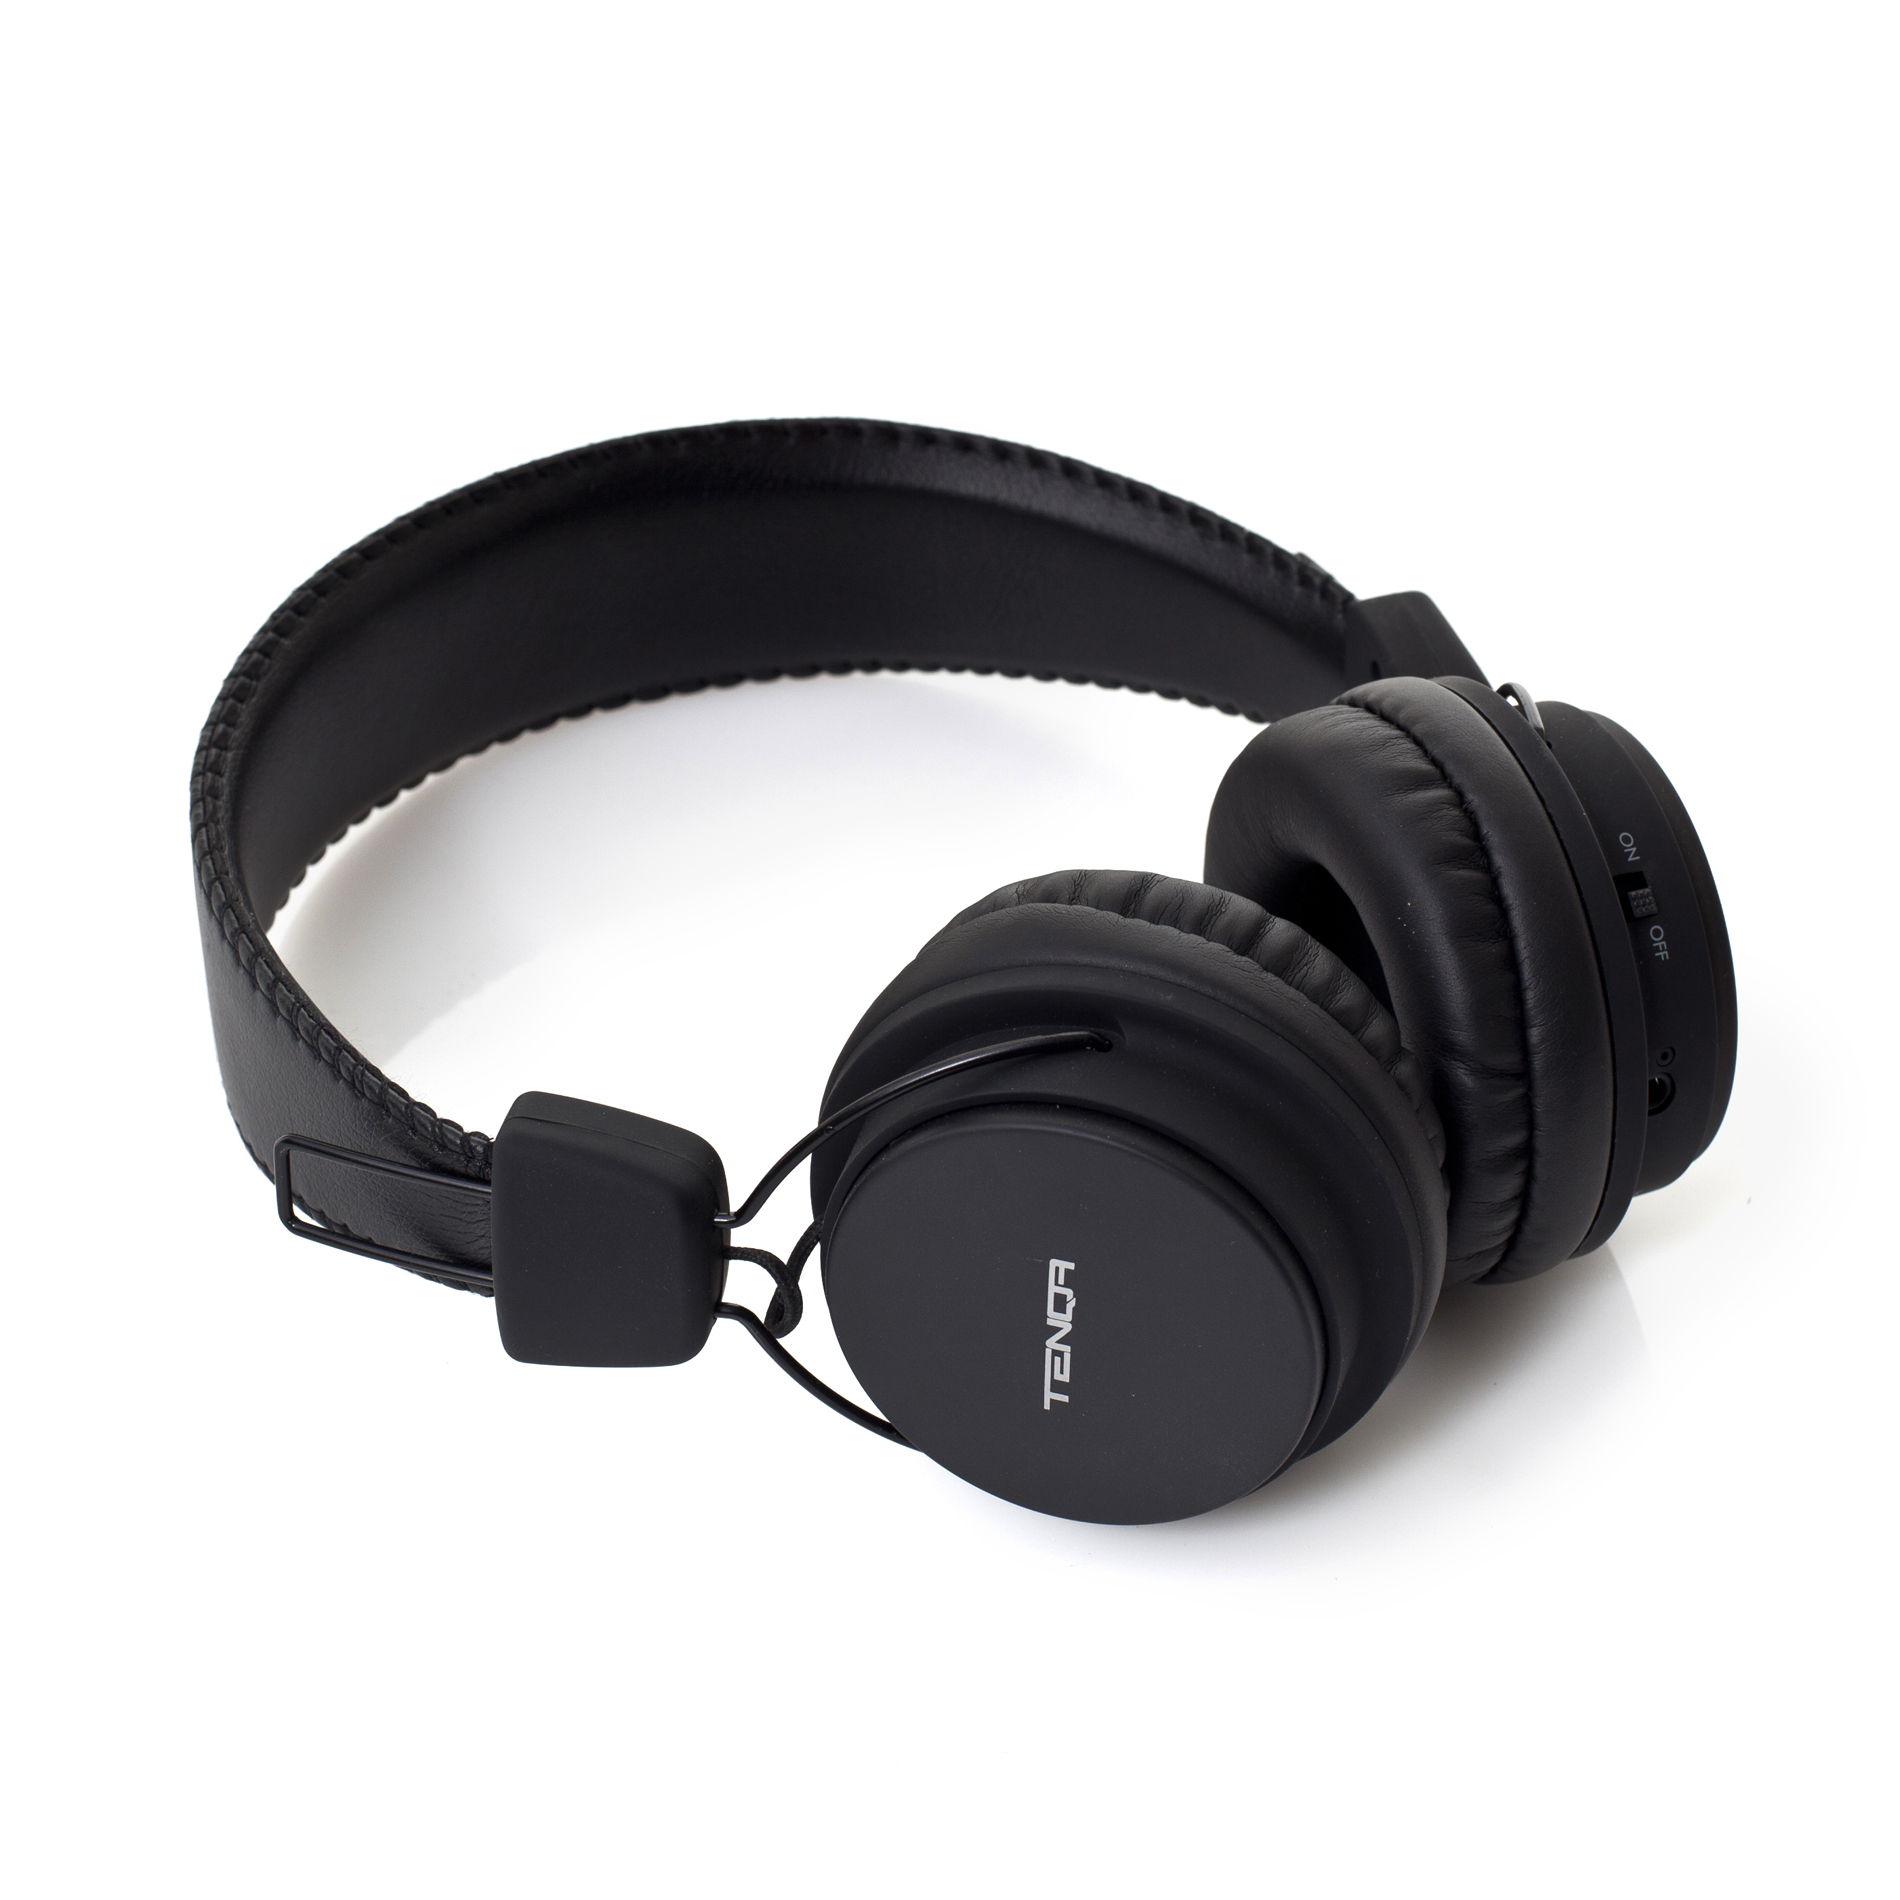 Tenqa Releases DJ Style REMXD Bluetooth® Headphones for $39